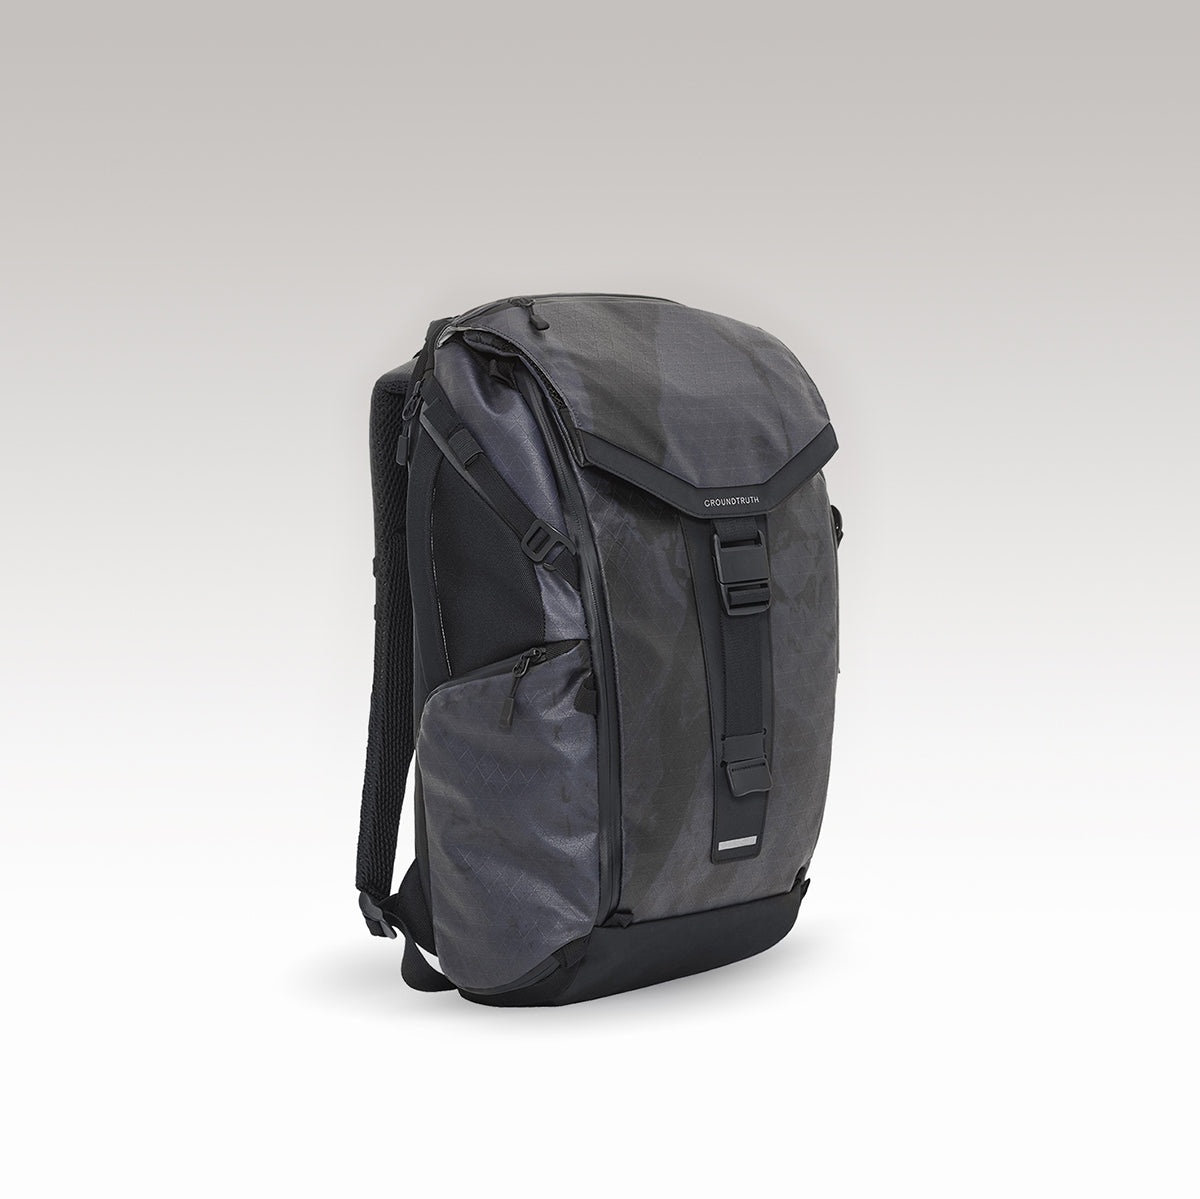 RIKR 23L Ultimate Backpack GROUNDTRUTH #color_ice sheet